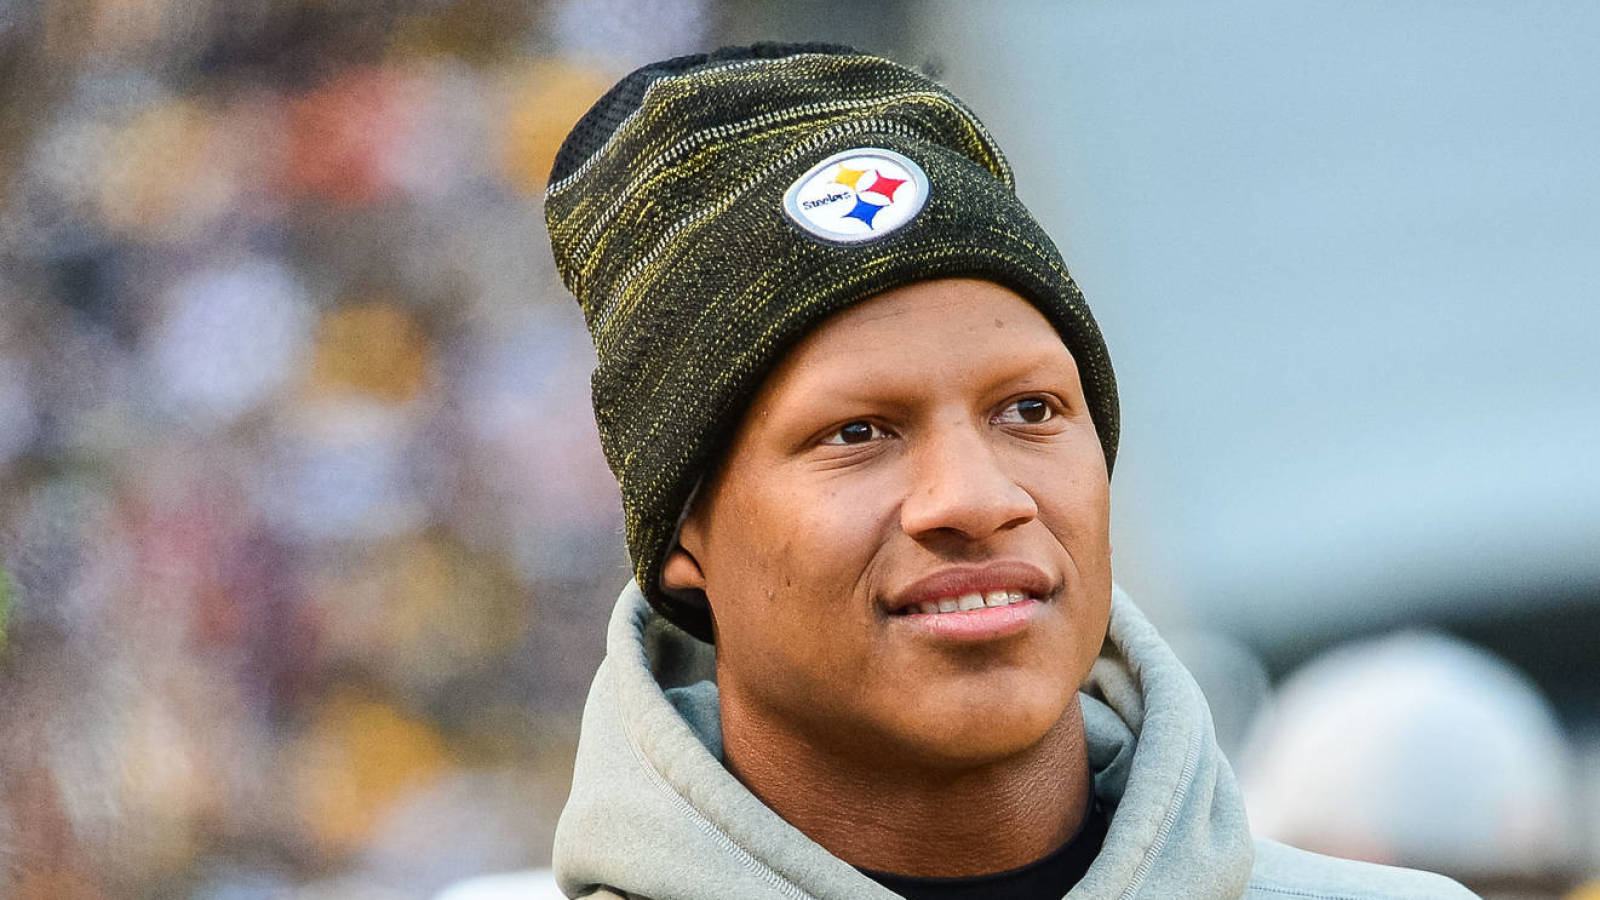 Ryan Shazier attends Steelers game wearing his own jersey